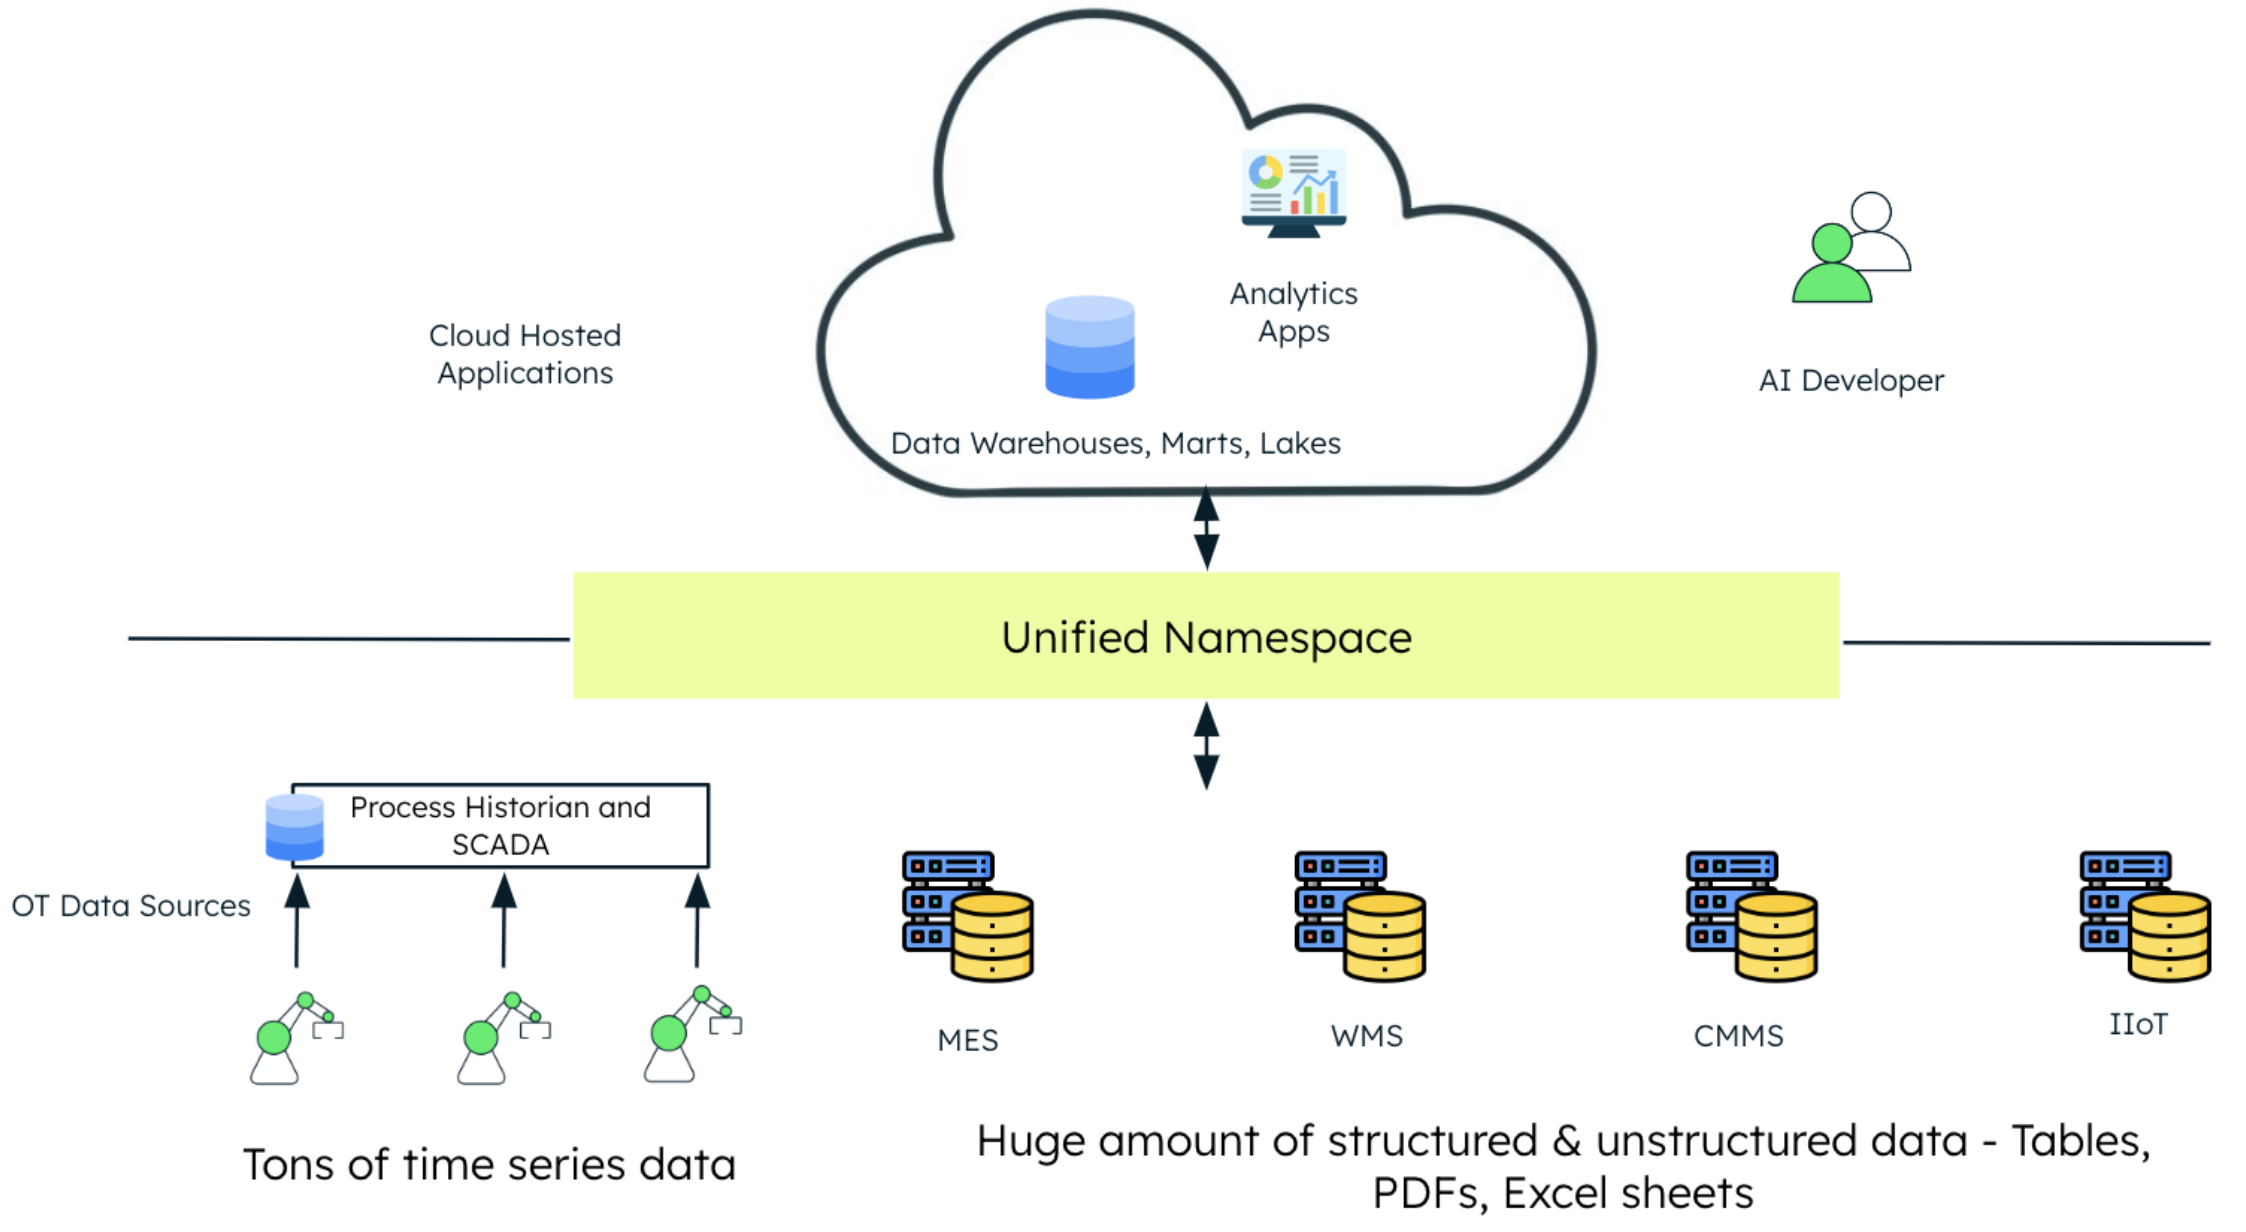 This image is the same as the prior image, but in this case Unified Namespace provides governance over the data flowing into the data warehouse and ensures that the right data and context is provided to all the applications connected to it.